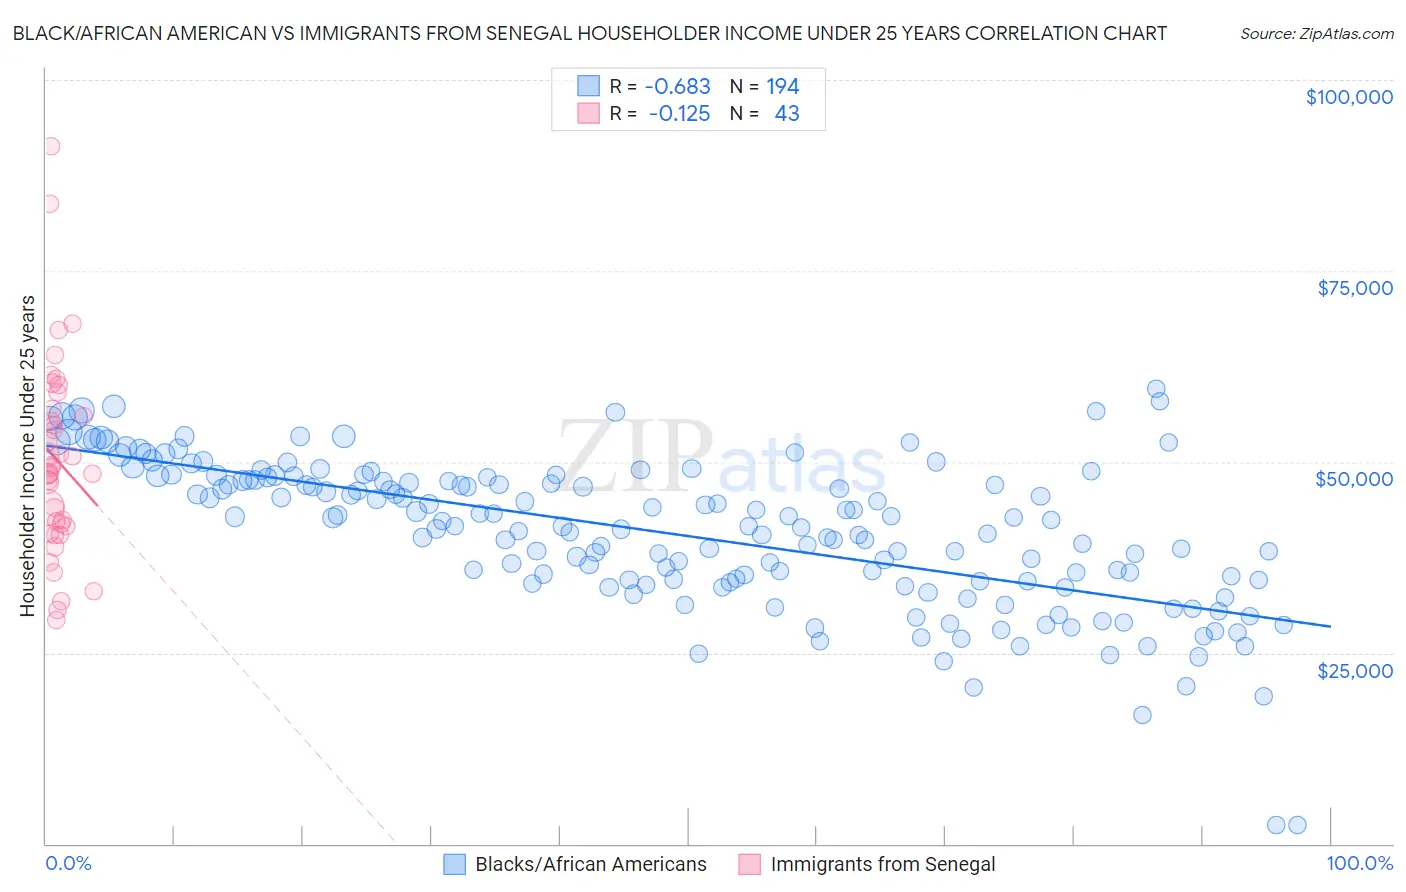 Black/African American vs Immigrants from Senegal Householder Income Under 25 years